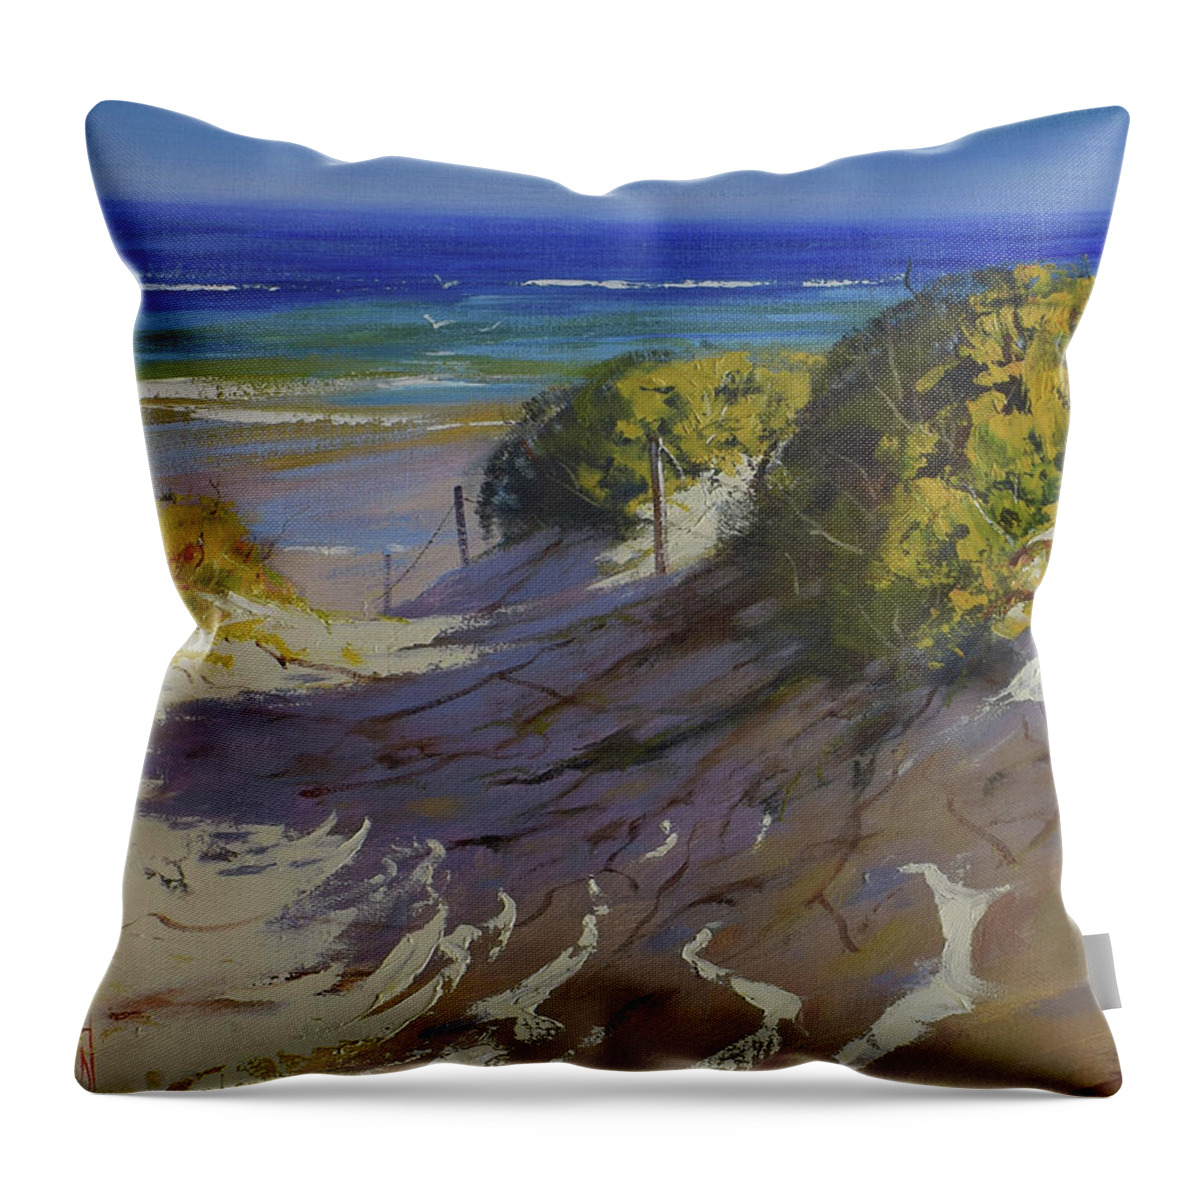 Sand Dunes Throw Pillow featuring the painting Sand Dune Patterns by Graham Gercken